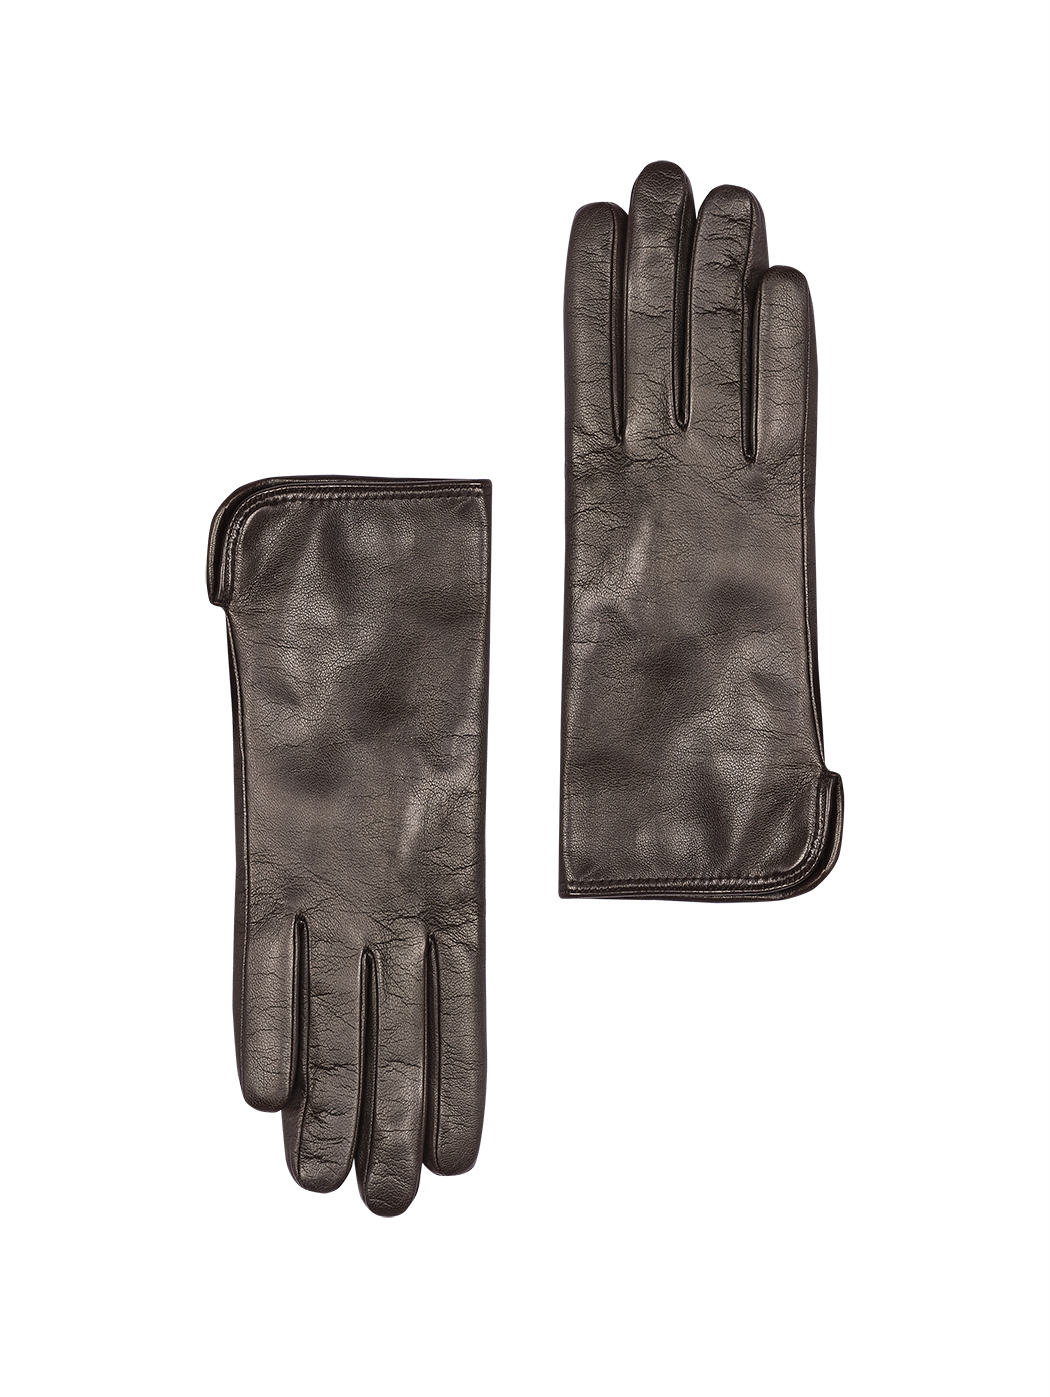 Women's Lambskin Gloves with Cashmere Lining Brown